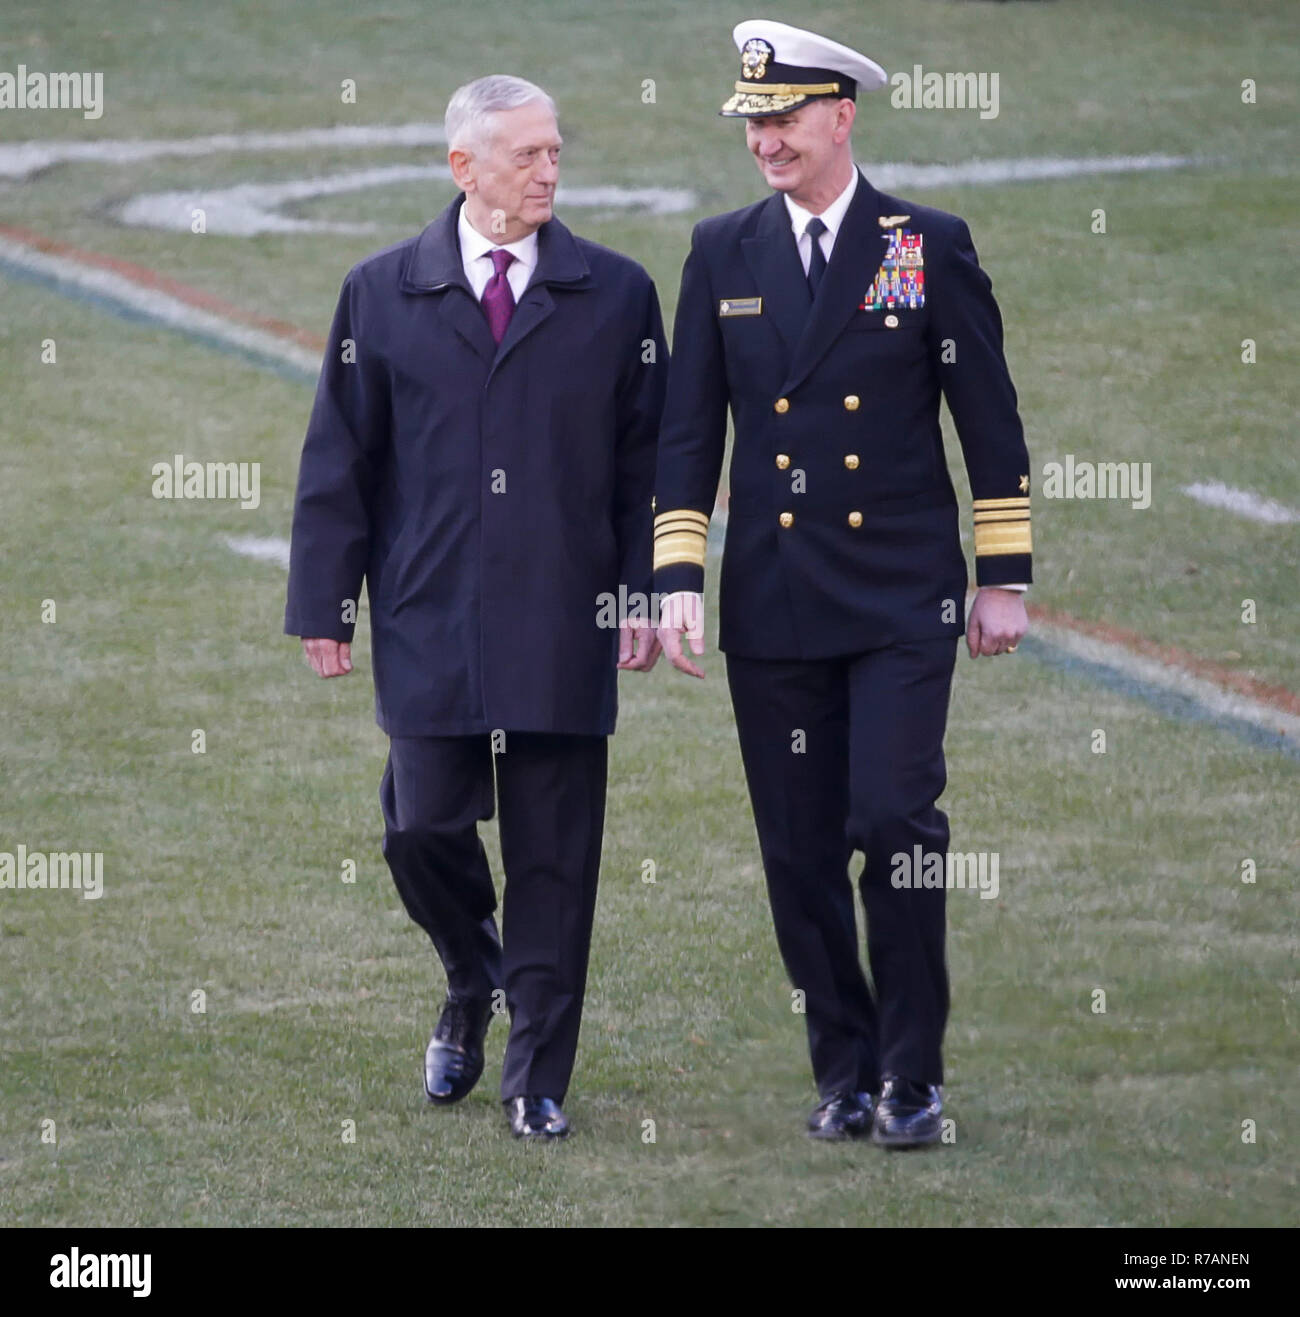 Philadelphia, USA. 8th Dec, 2018. Secretary of Defense, Jim Mattis, and Superintendent of the Naval Academy, Vice Admiral Walter E. Carter Jr., walk toward Navy's bench before the 119th Army Navy game at Lincoln Financial Field in Philadelphia, USA. Justin Cooper/CSM/Alamy Live News Stock Photo